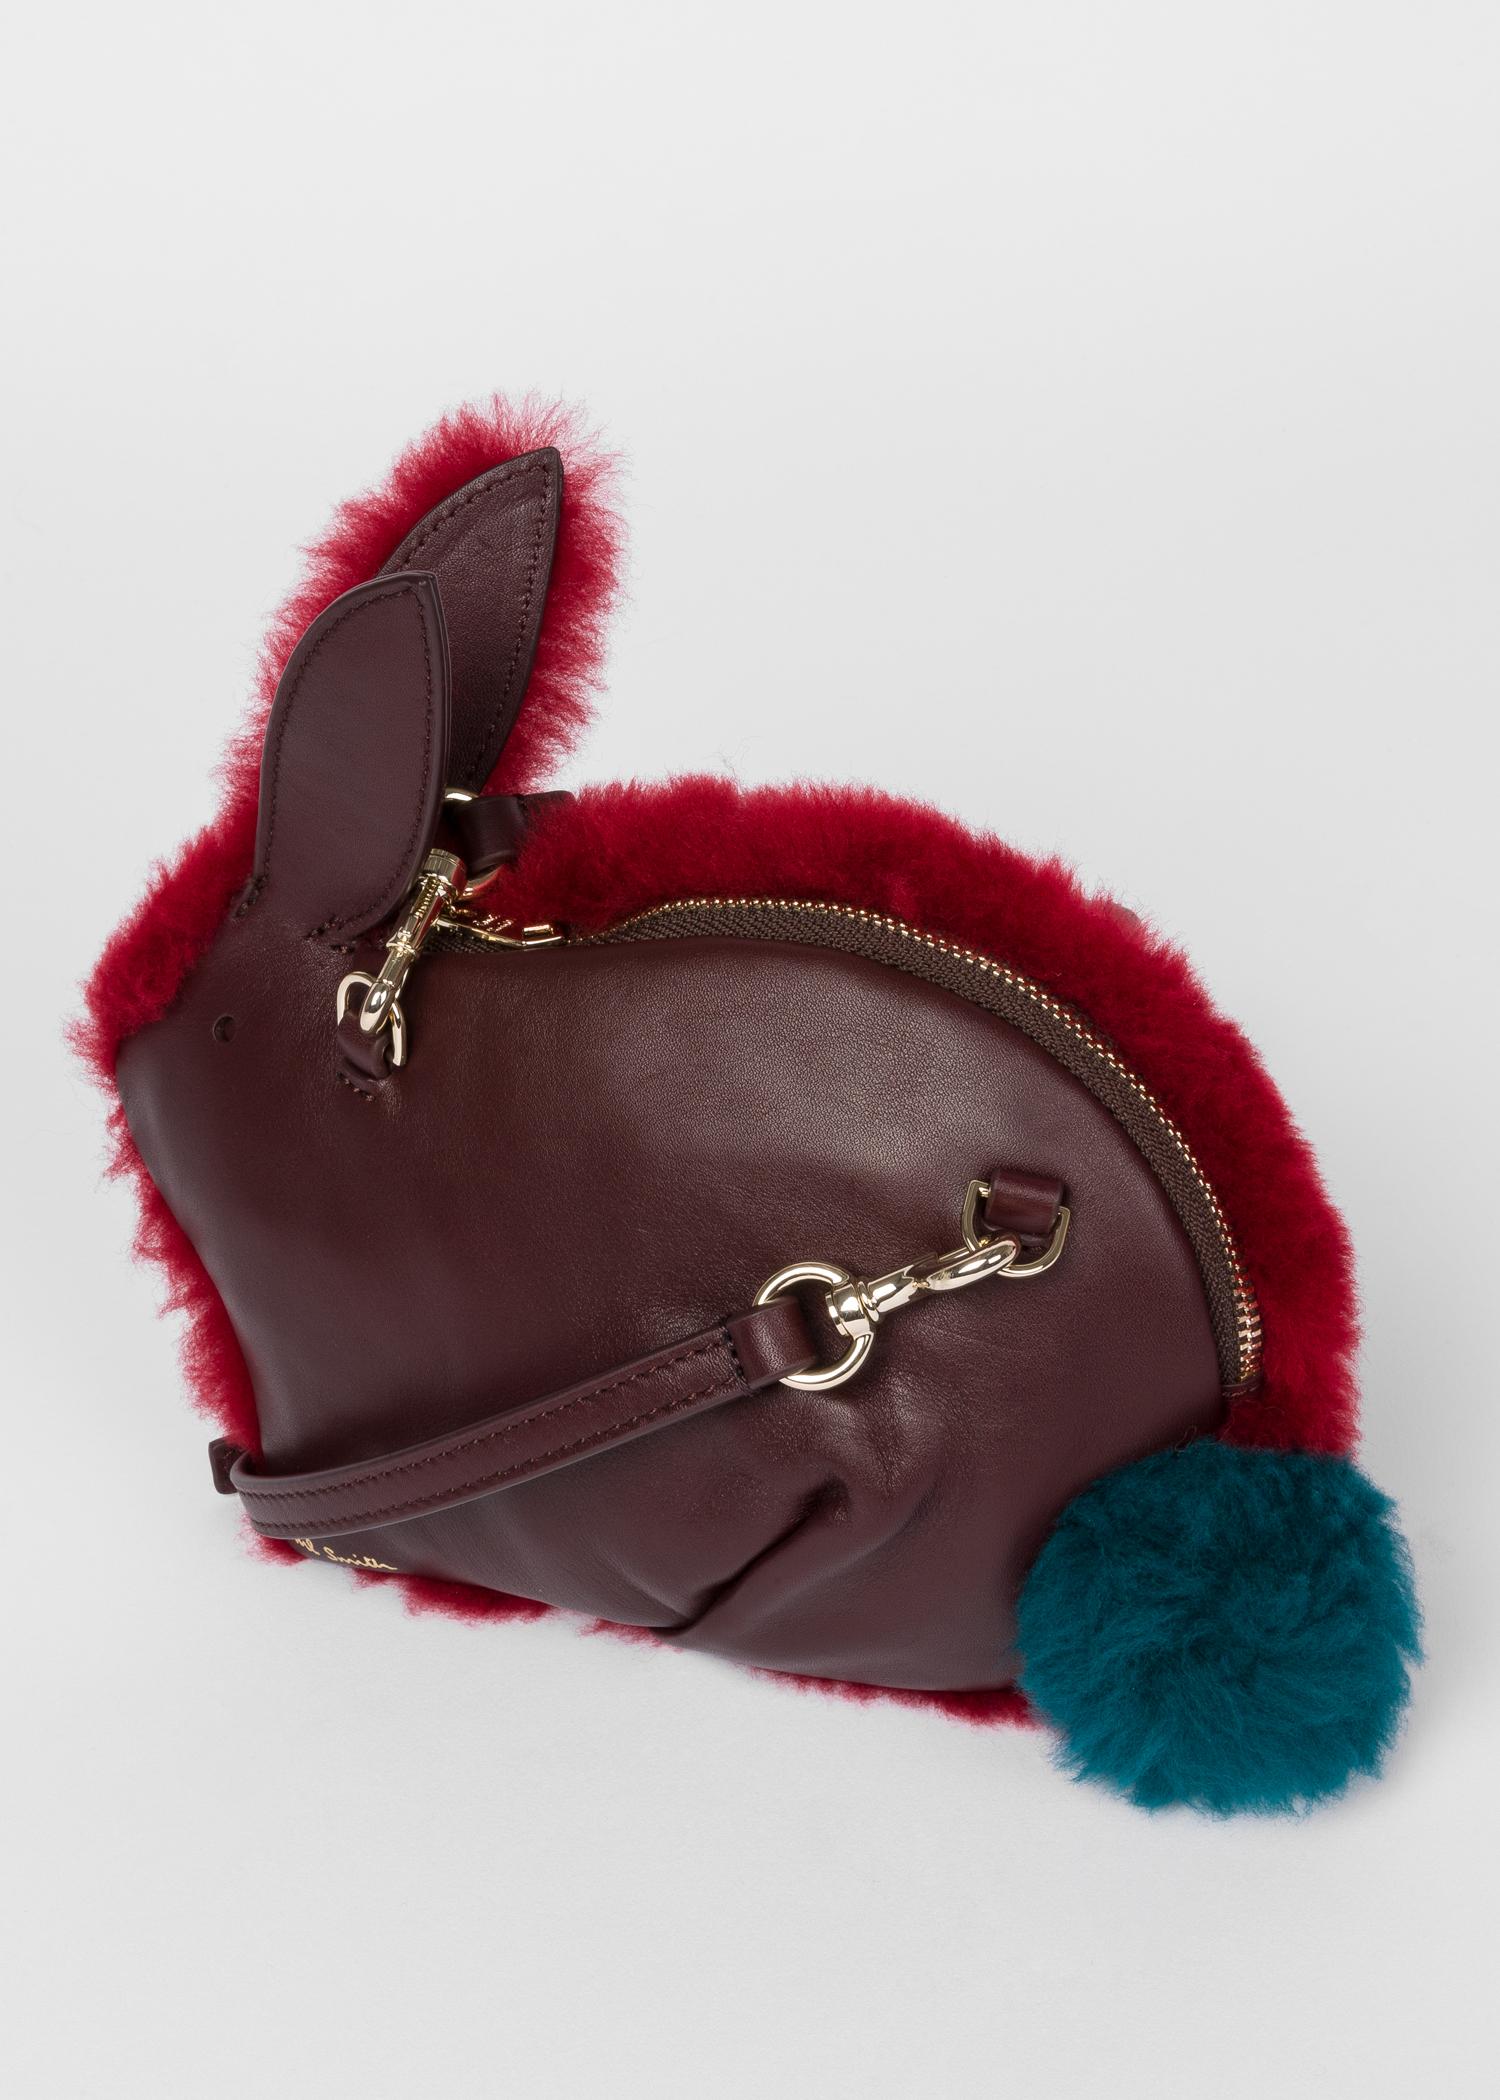 Paul Smith Leather Burgundy And Red Shearling Rabbit Bag for Men - Lyst